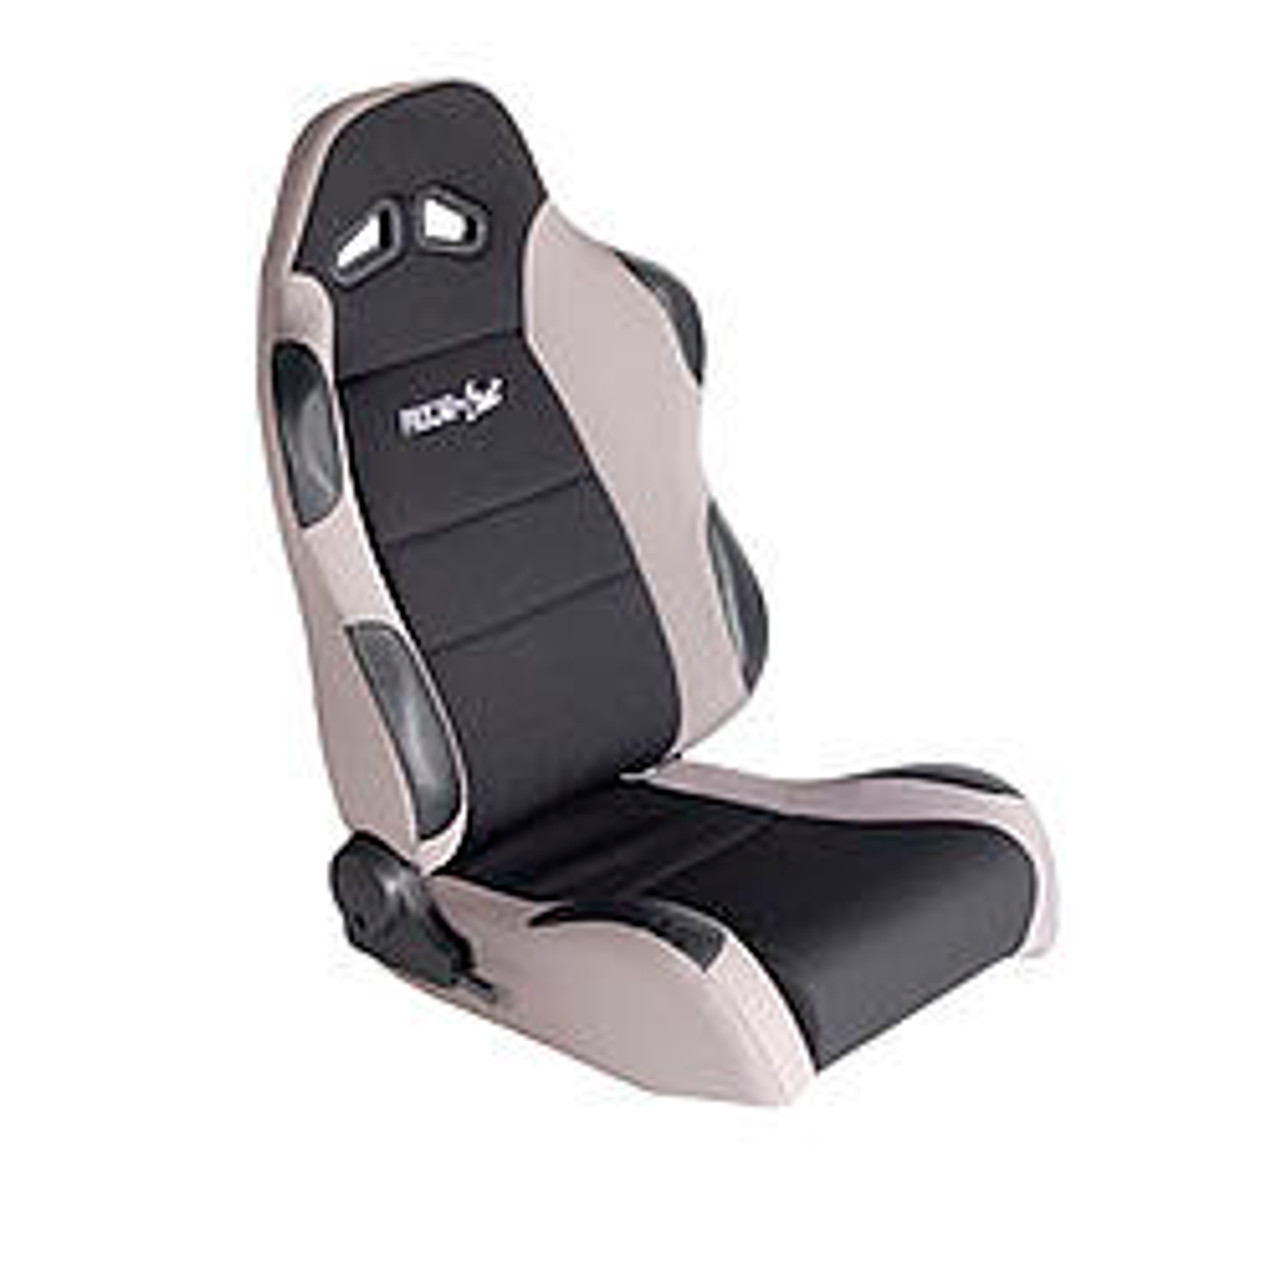 Scat Sportsman Racing Seat - Right - Gray Velour - SCA80-1606-62R